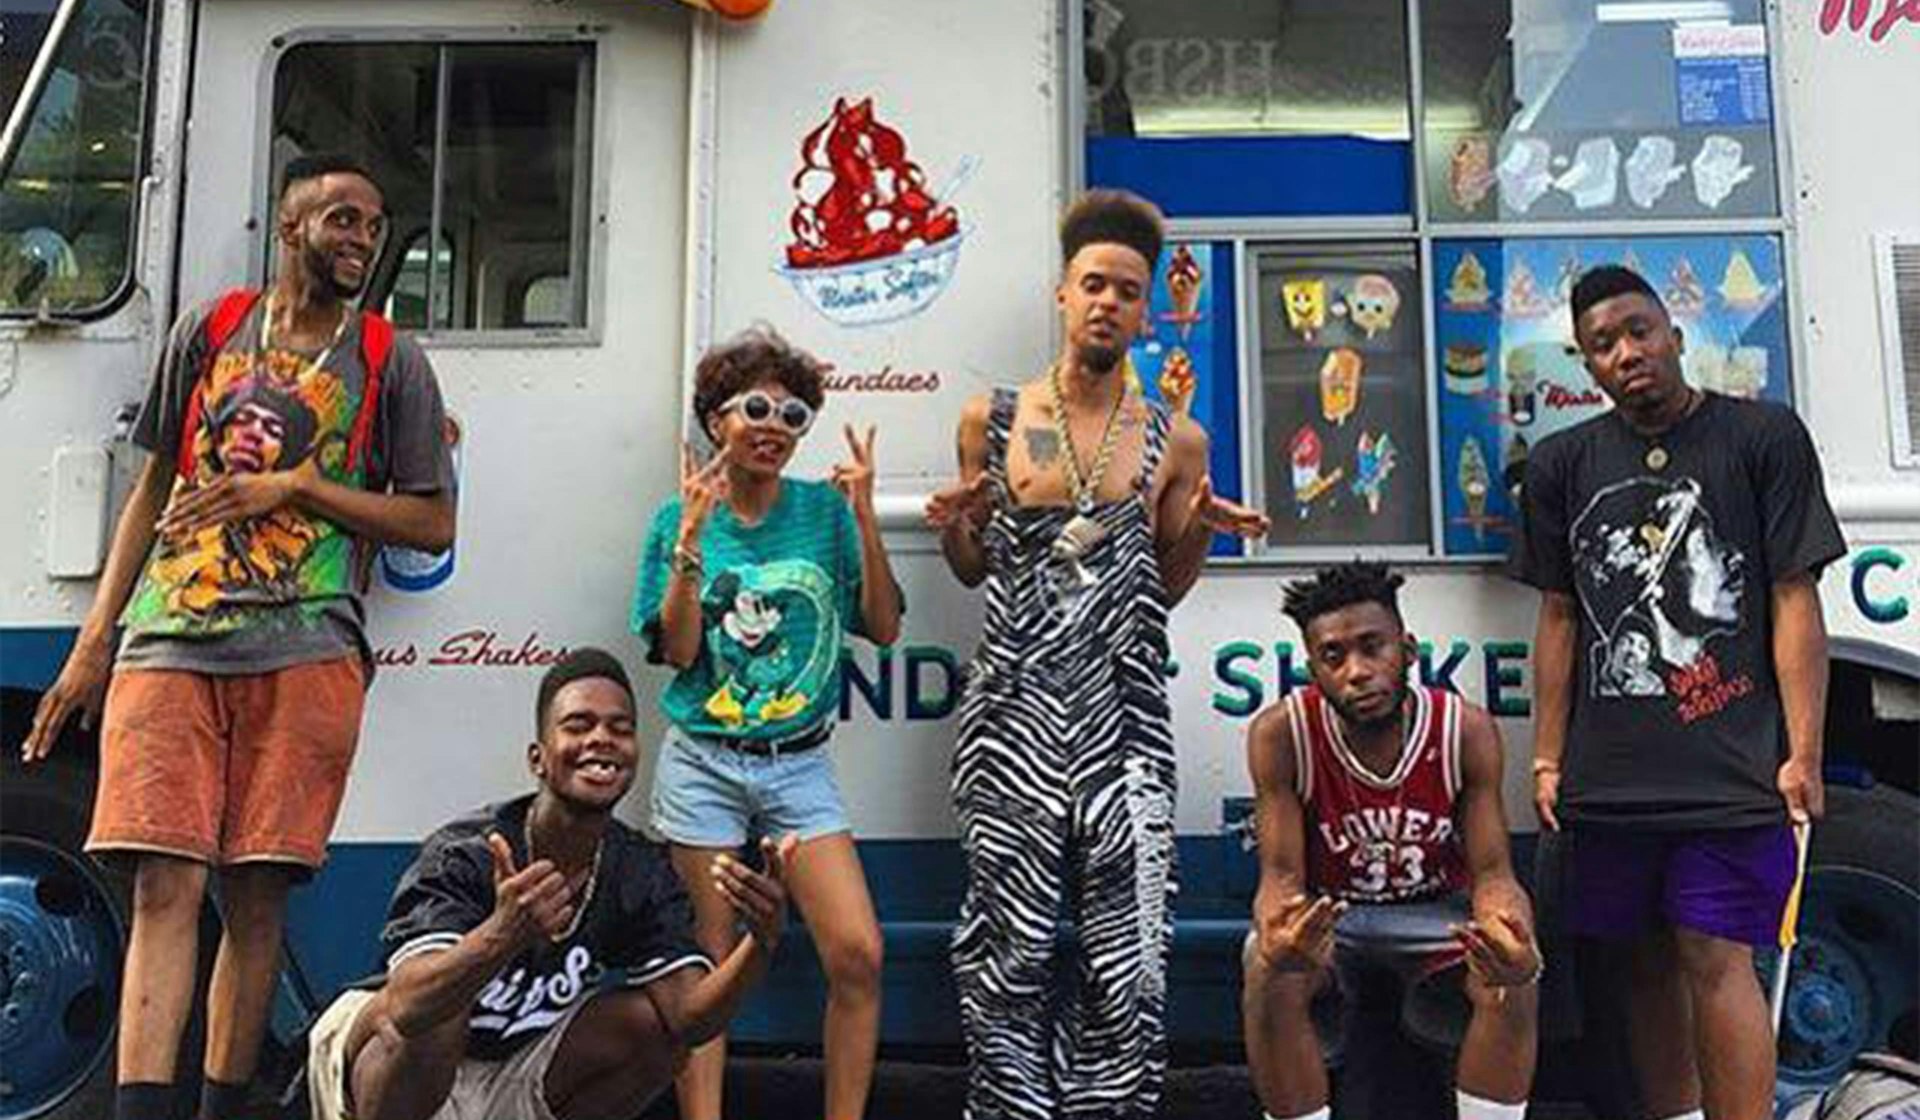 Tribe NYC are breathing fresh life into ’90s hip hop culture